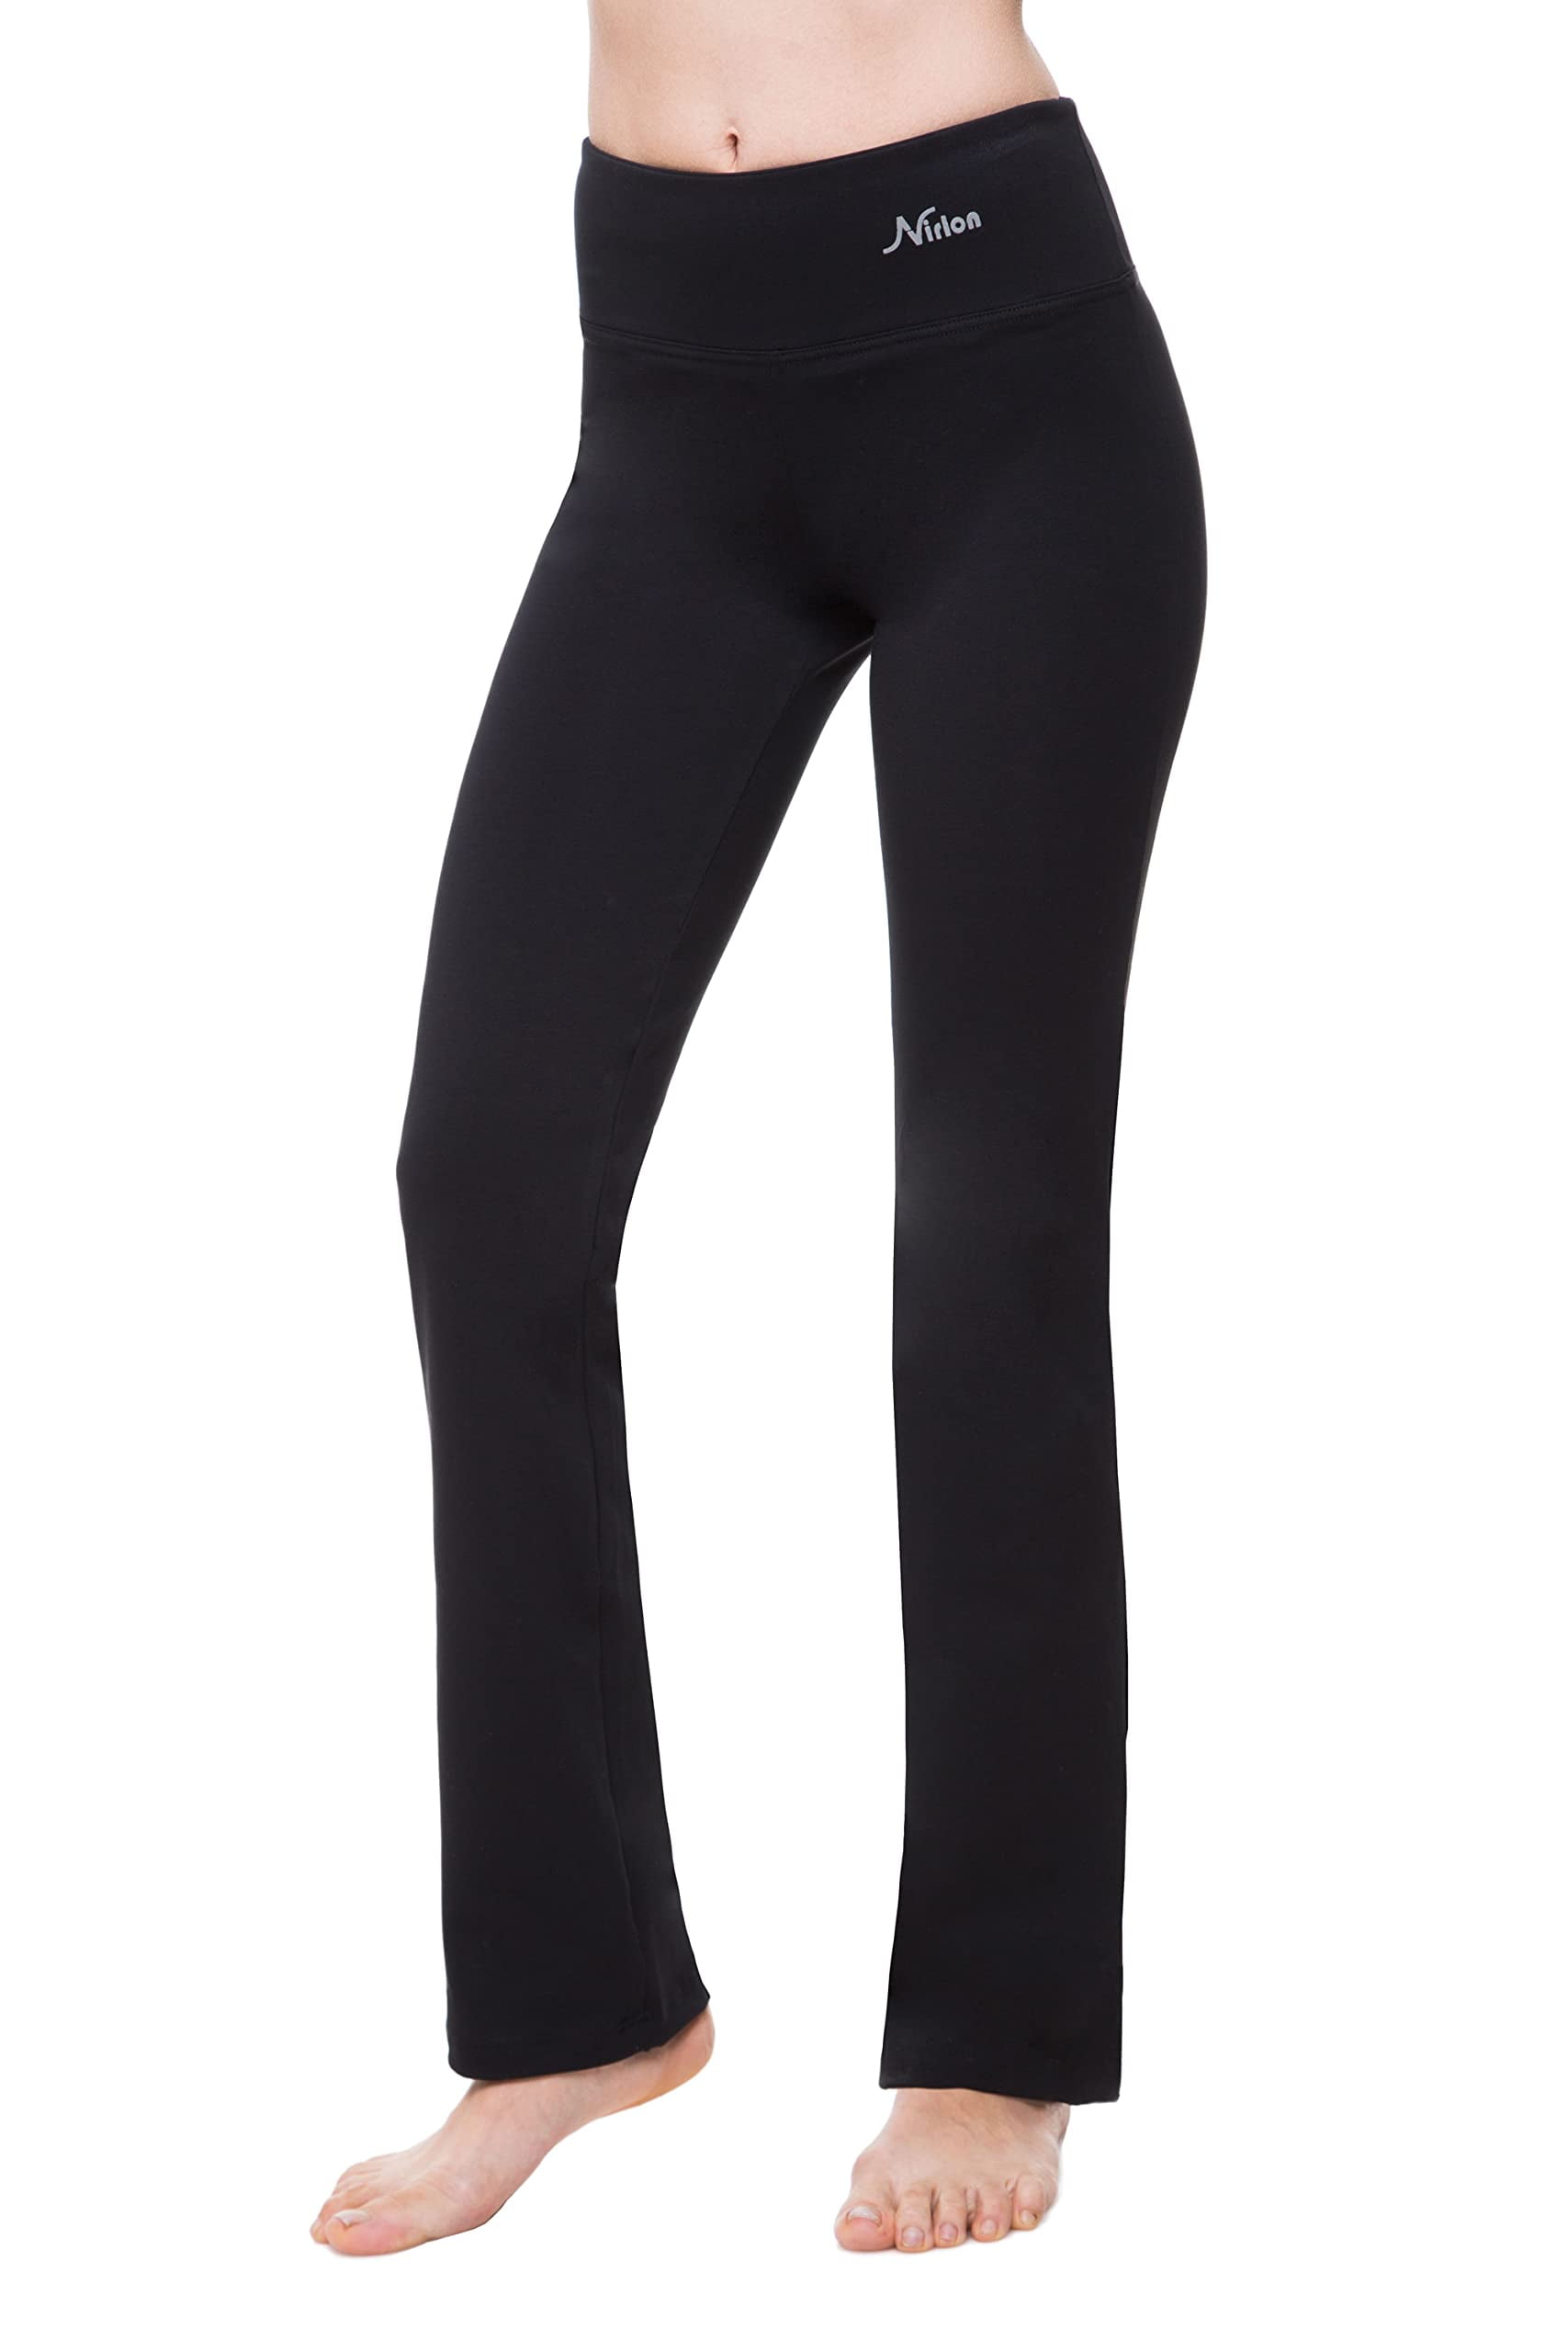 Royallove Flare Leggings, Crossover Yoga Pants with Tummy Control,  High-Waisted and Wide Leg